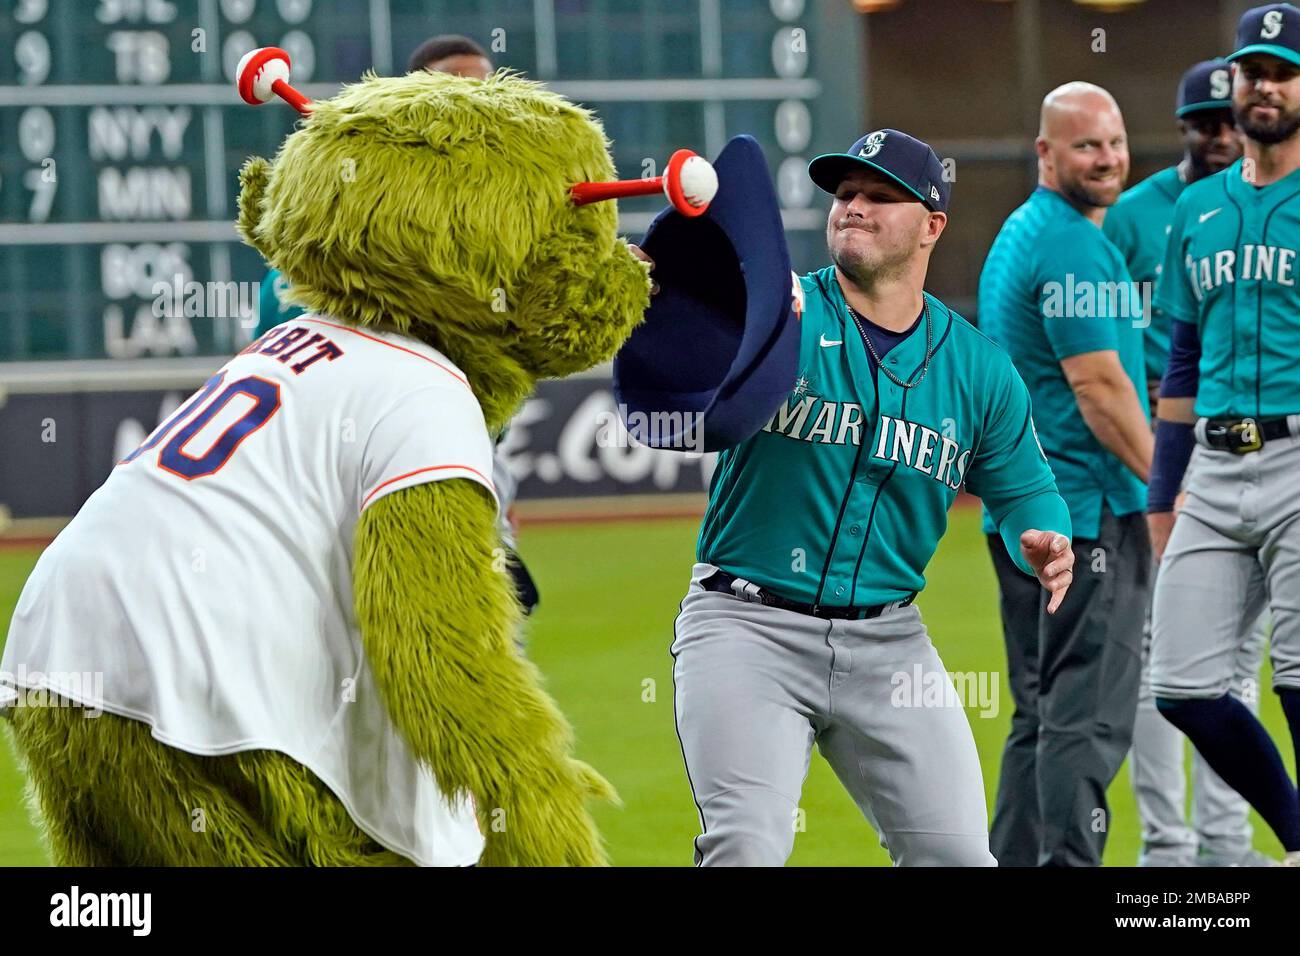 National Mascot Day: Houston Astros' Orbit is No. 7 in MLB